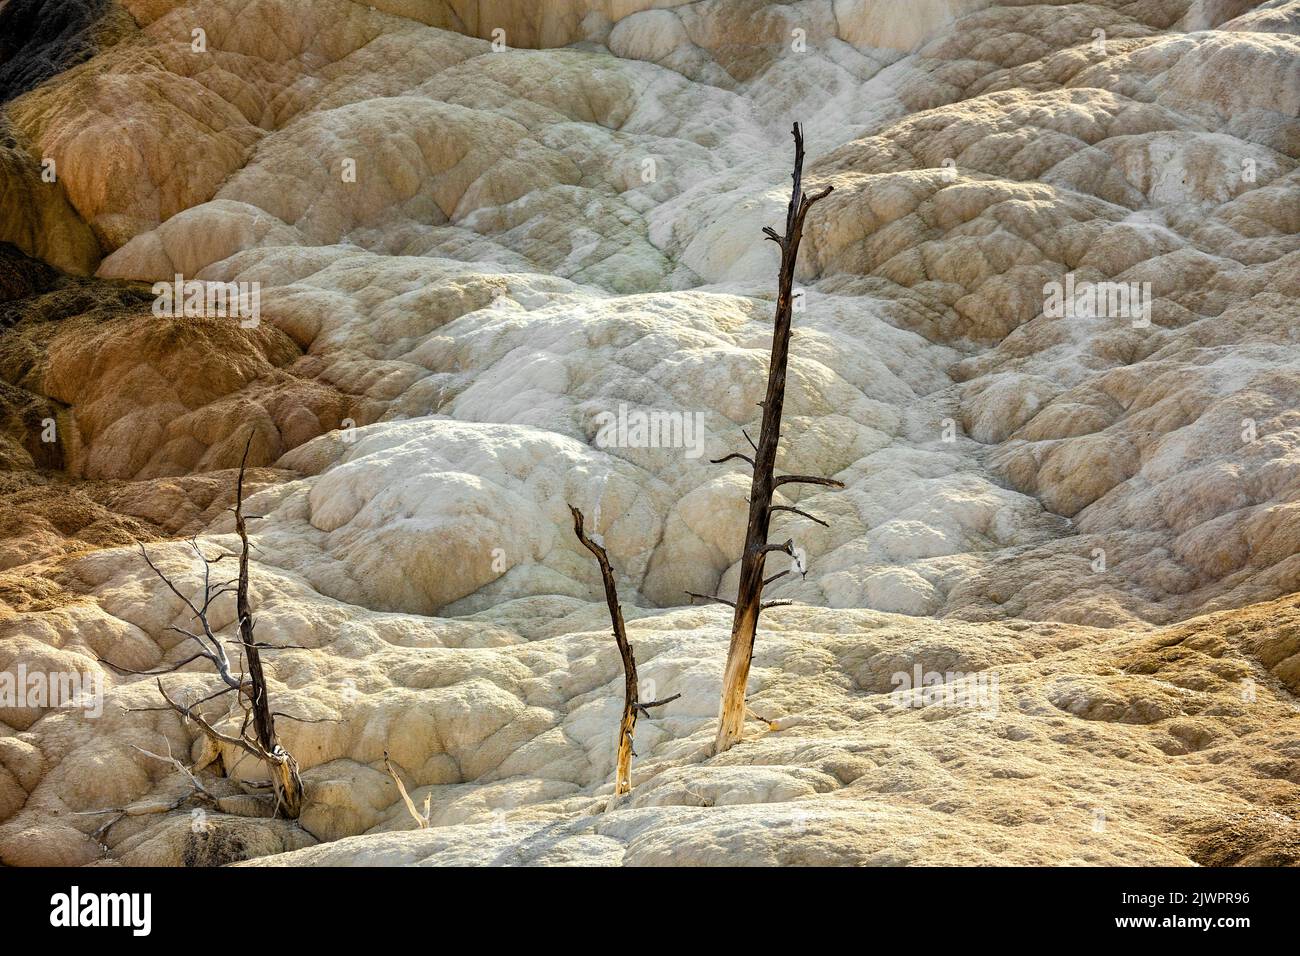 WY05046-00.....WYOMING -Dead trees in the Lower Terraces of Mammoth Hot Springs, Yellowstone National Park. Stock Photo